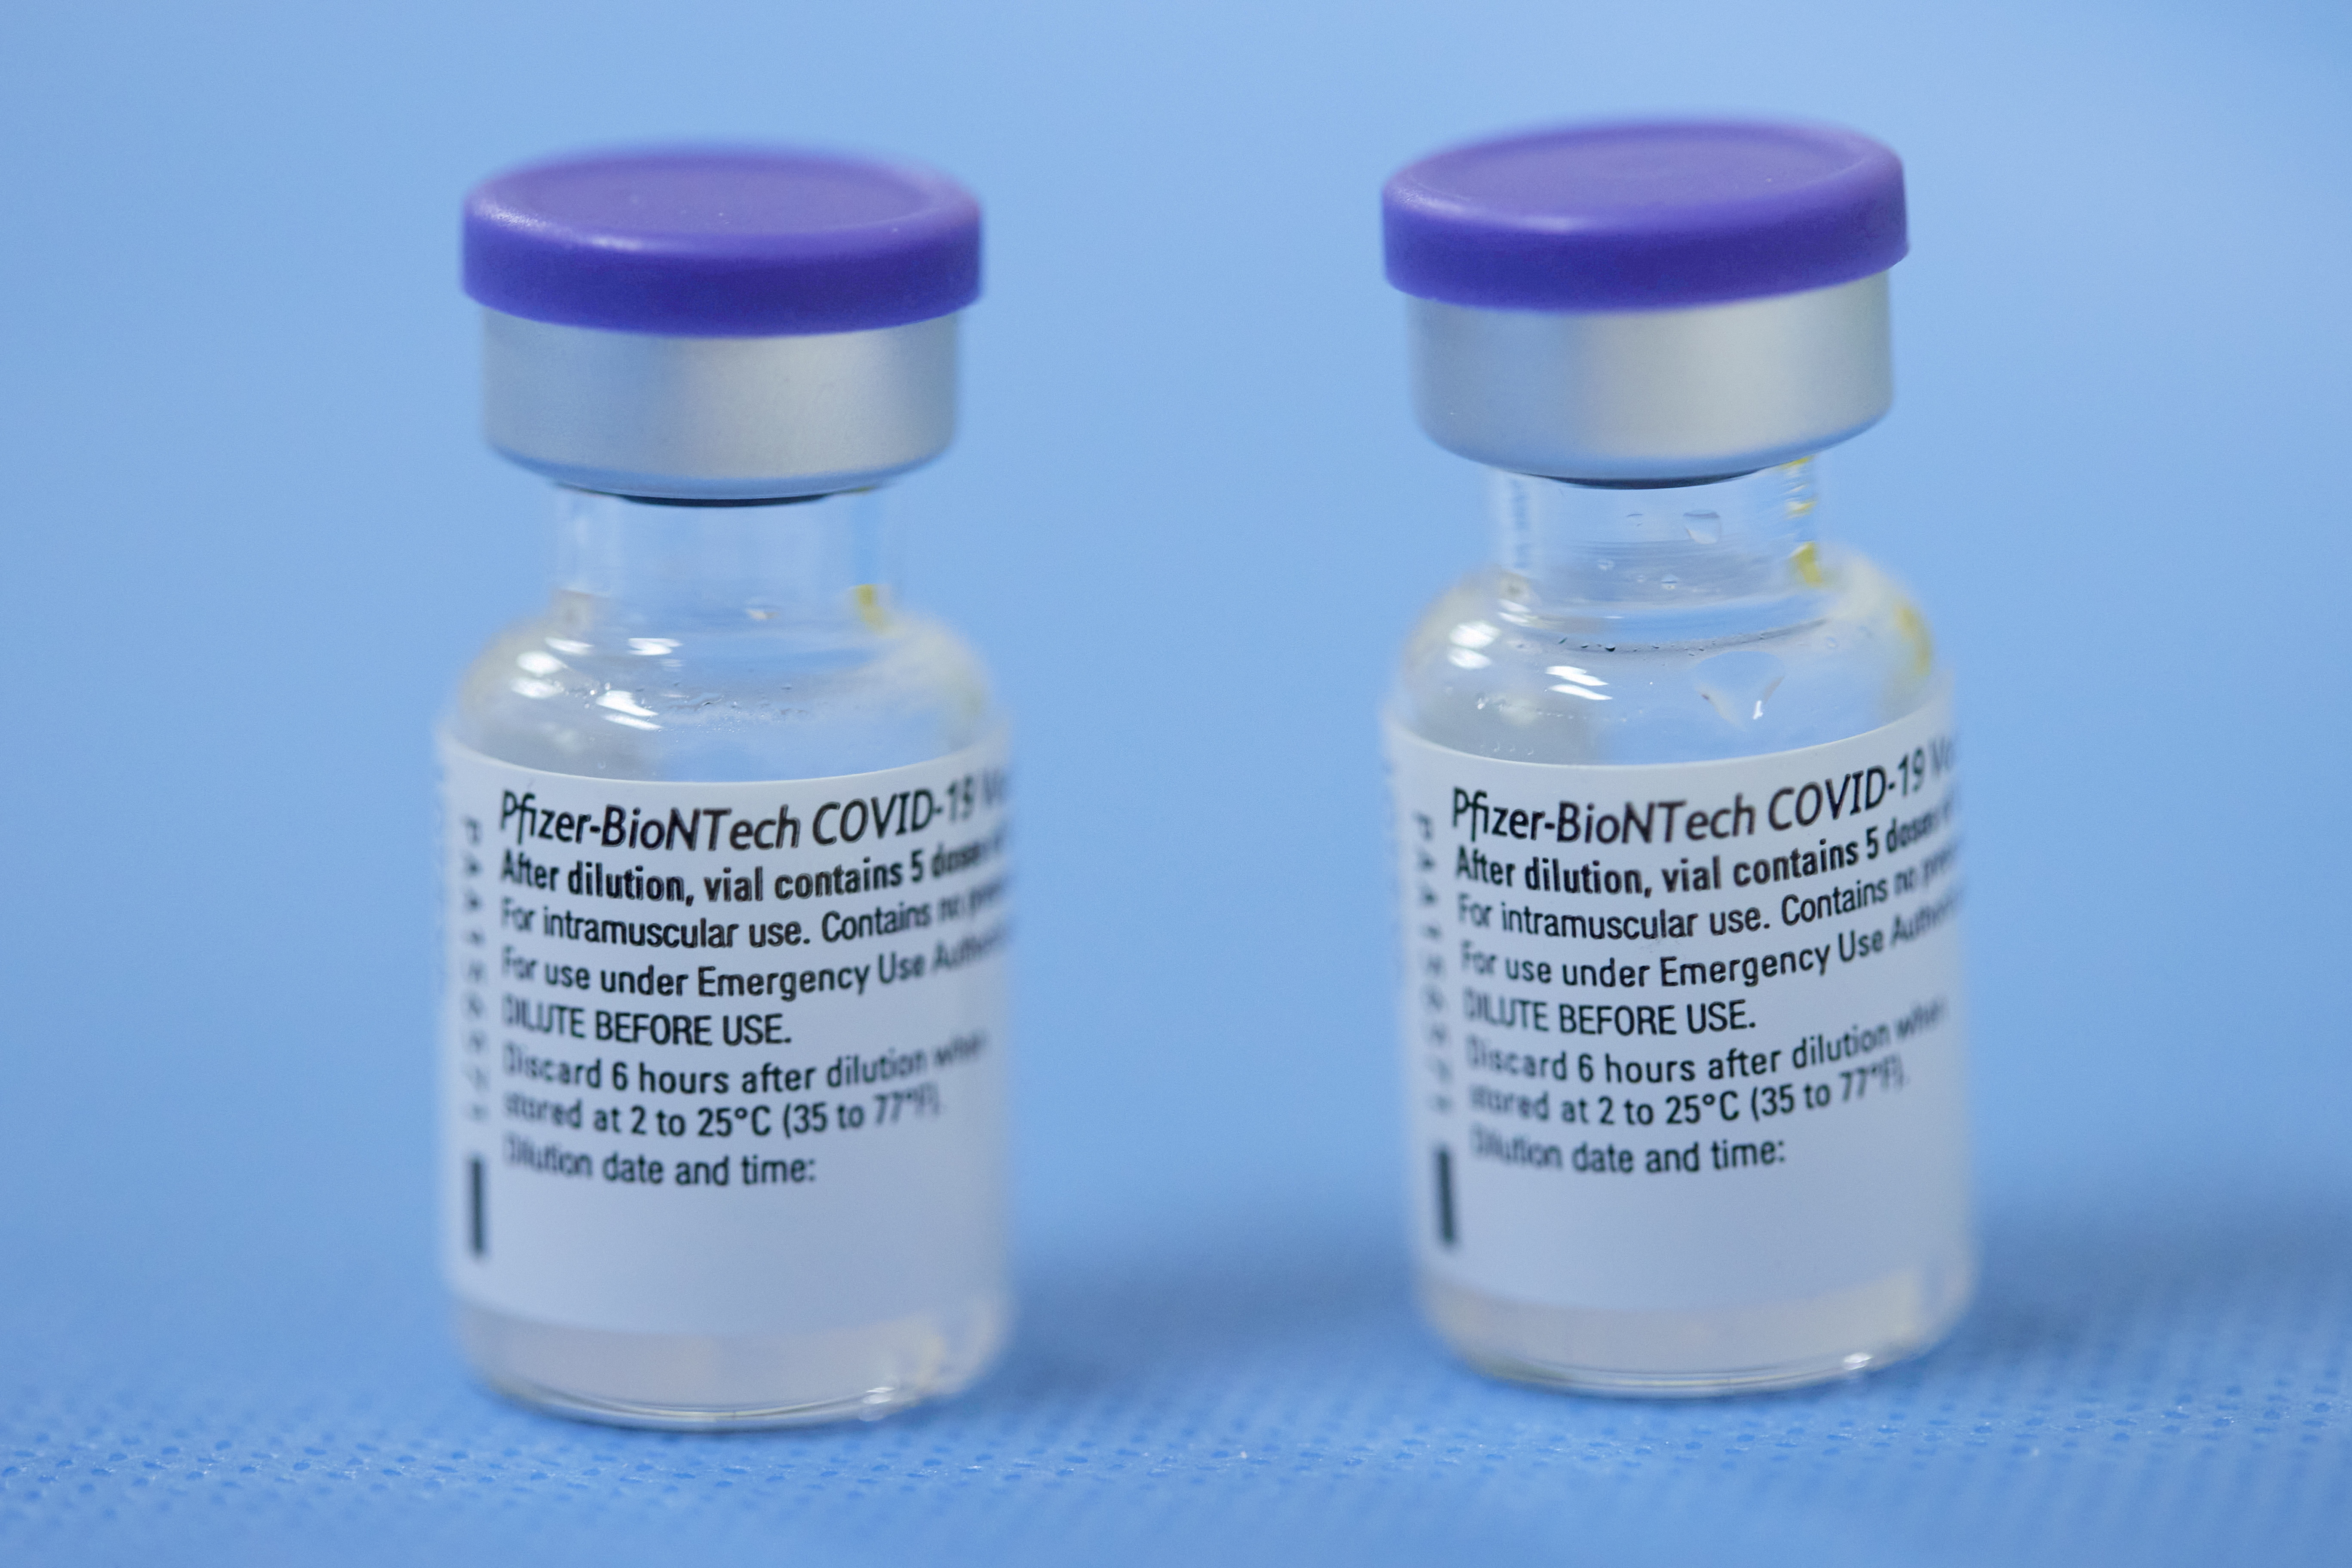 Vials of the Pfizer-BioNTech vaccine against COVID-19